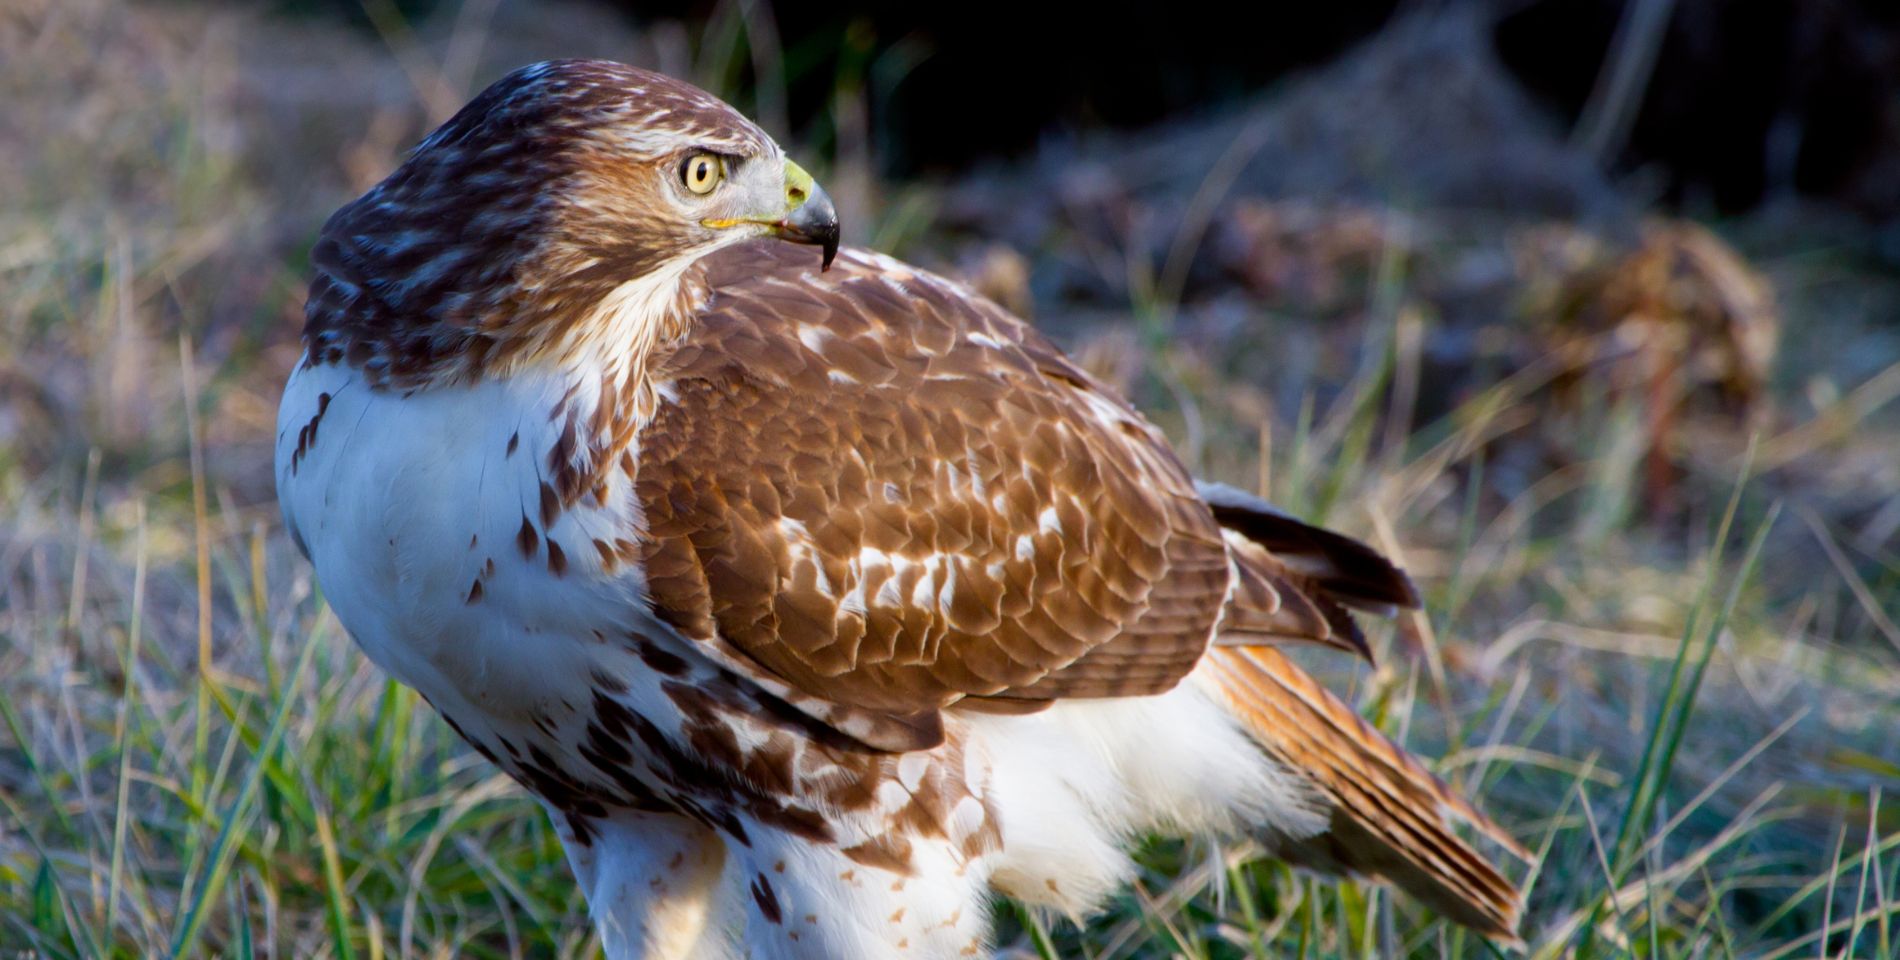 A red-tailed hawk on the ground